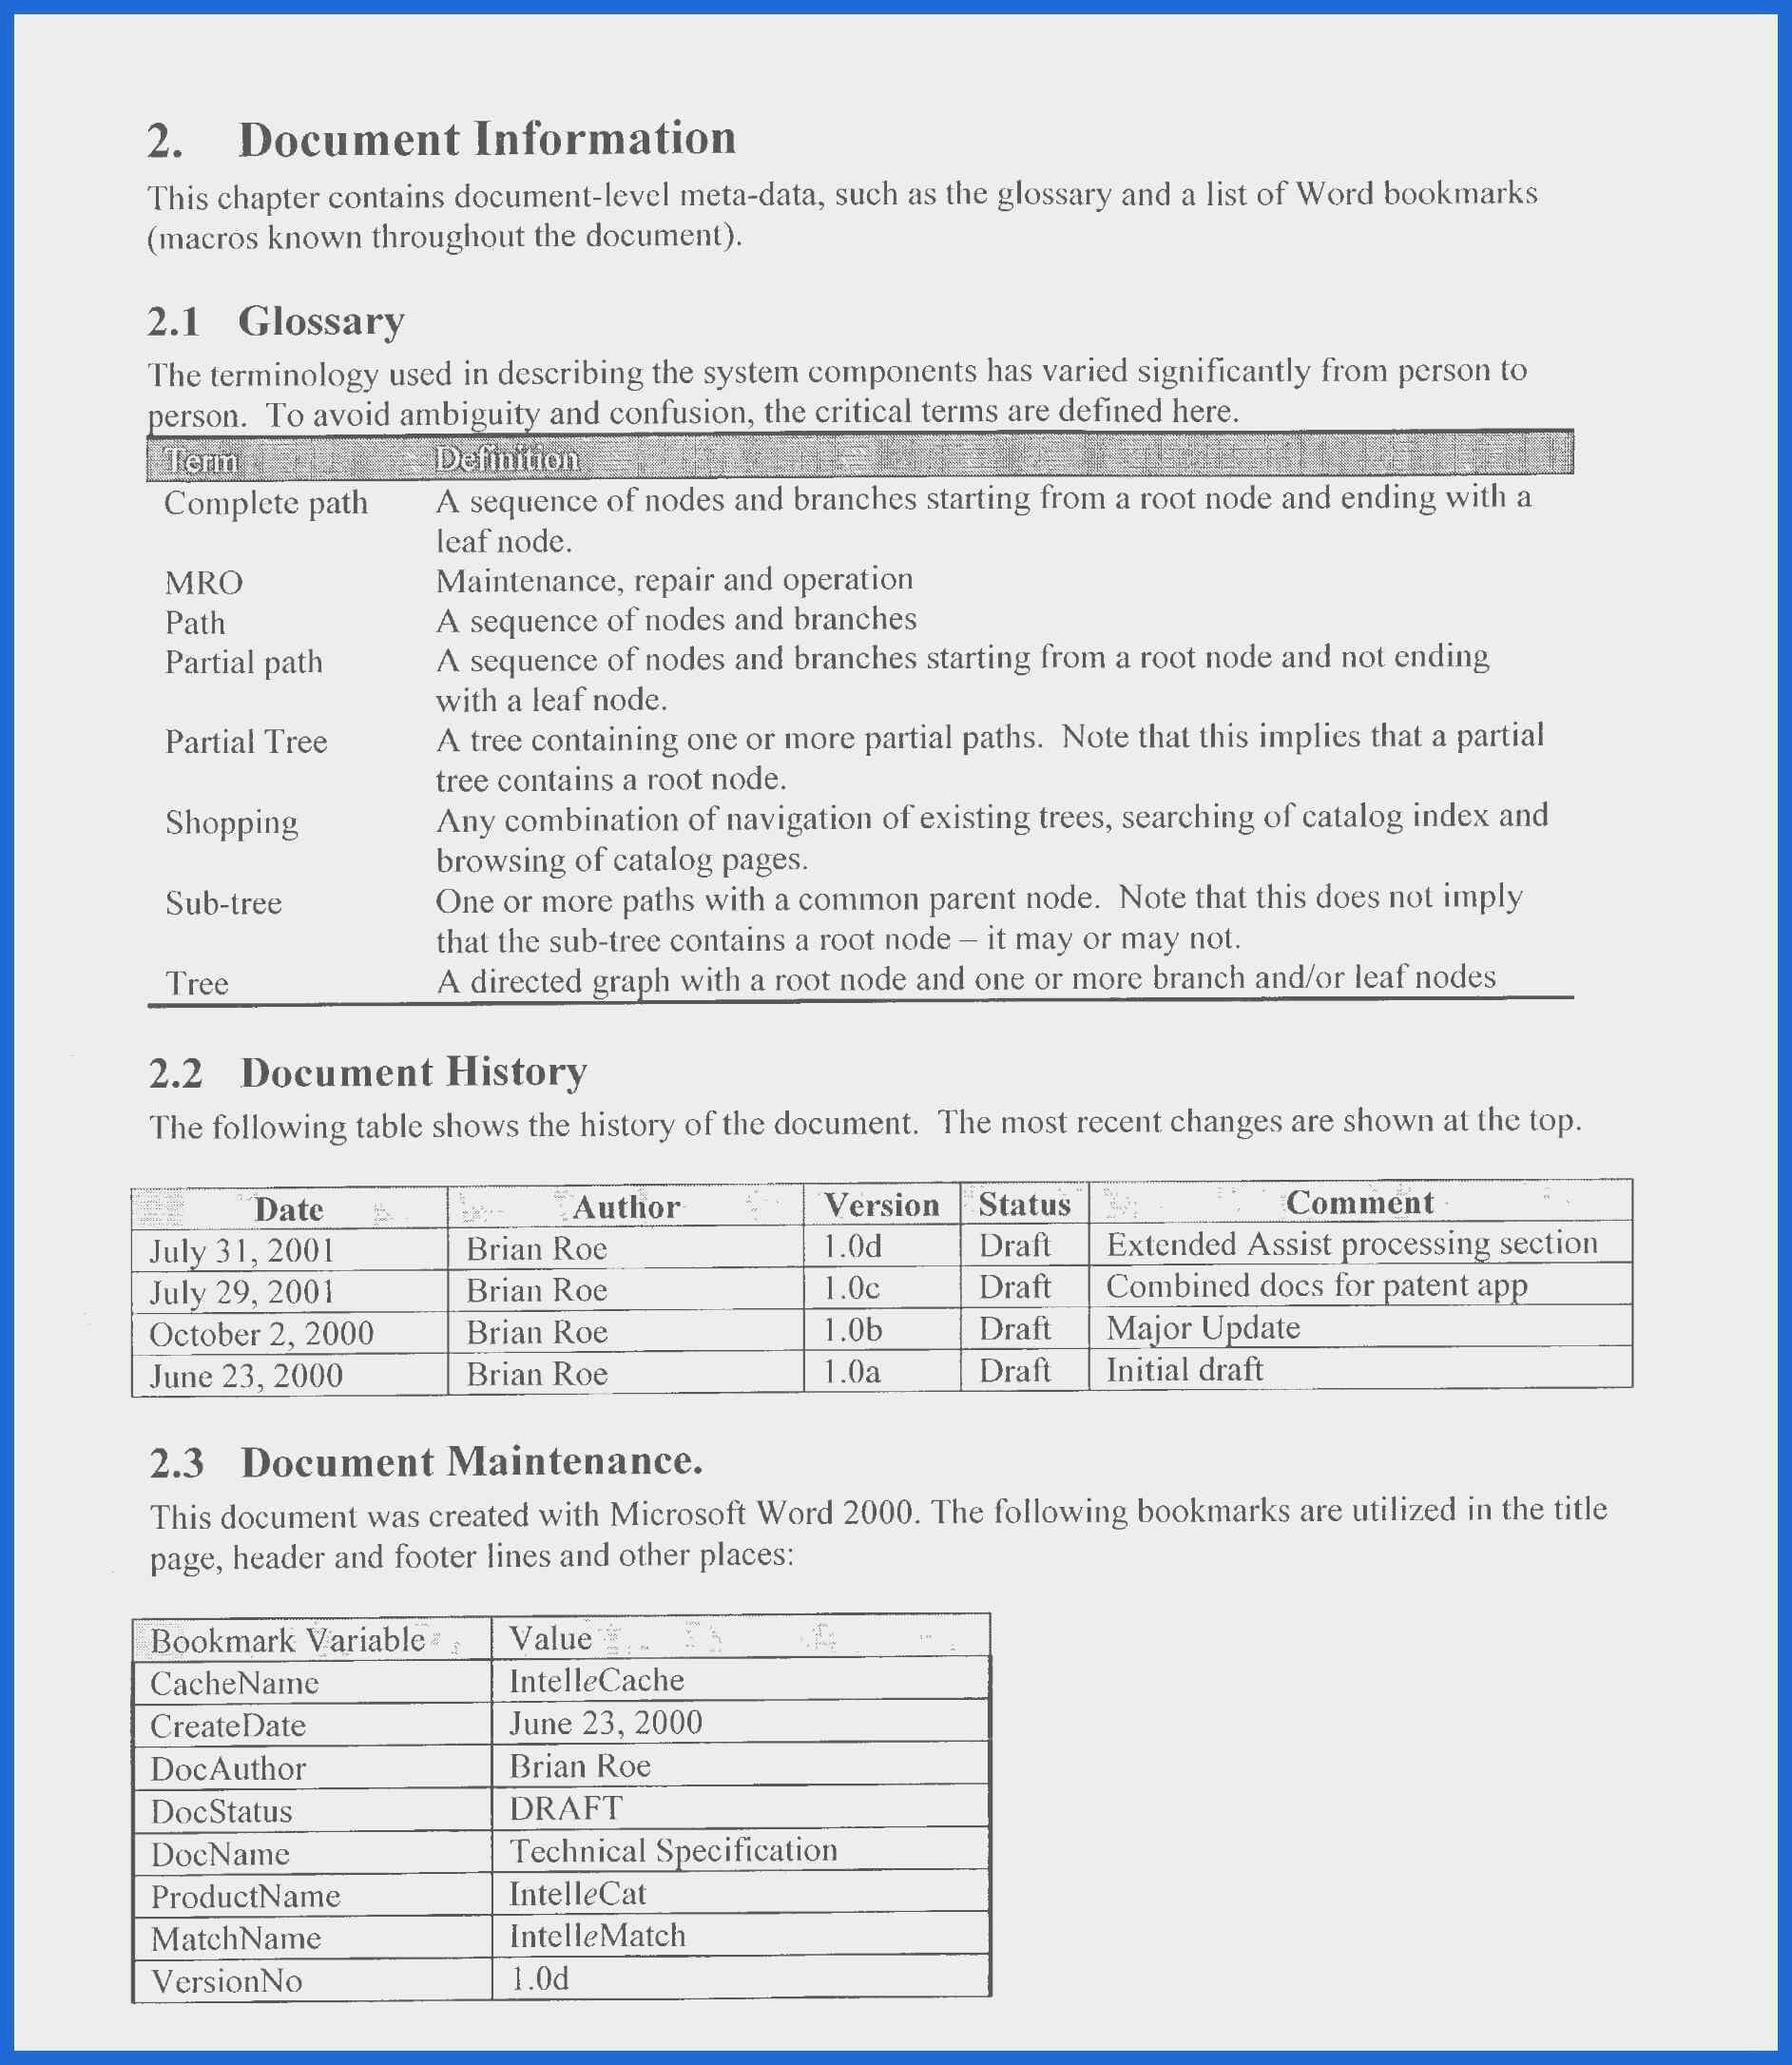 30 Free Simple Resume Templates | Jscribes Within Simple Resume Template Microsoft Word